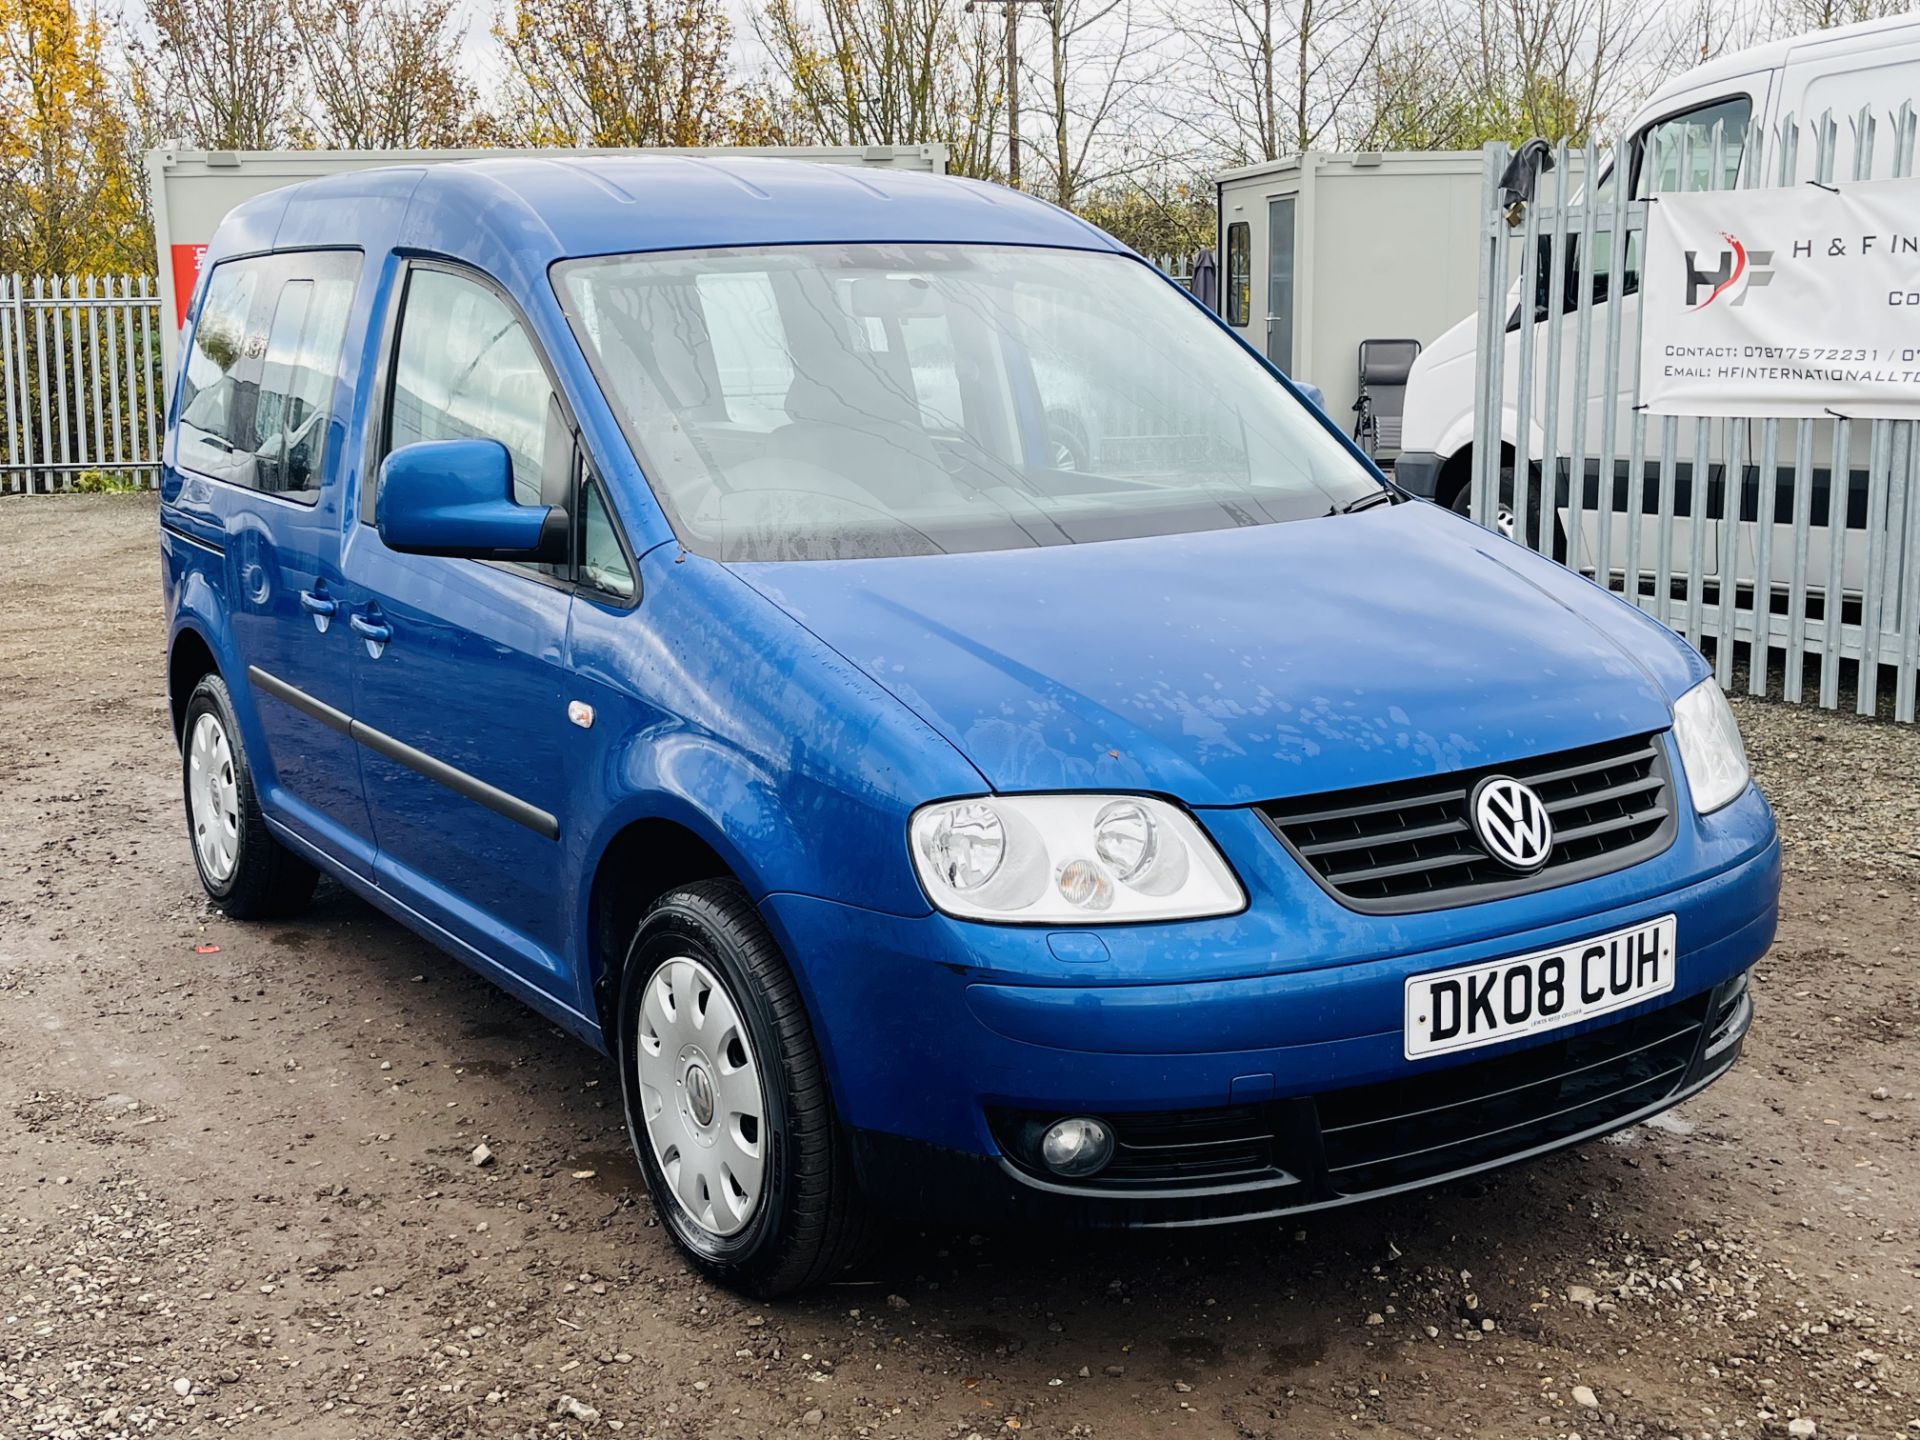 ** ON SALE ** Volkswagen Caddy Life 1.9 TDI DSG Auto 2008 '08 Reg'Air Con - Only Done 38k - - Image 2 of 24